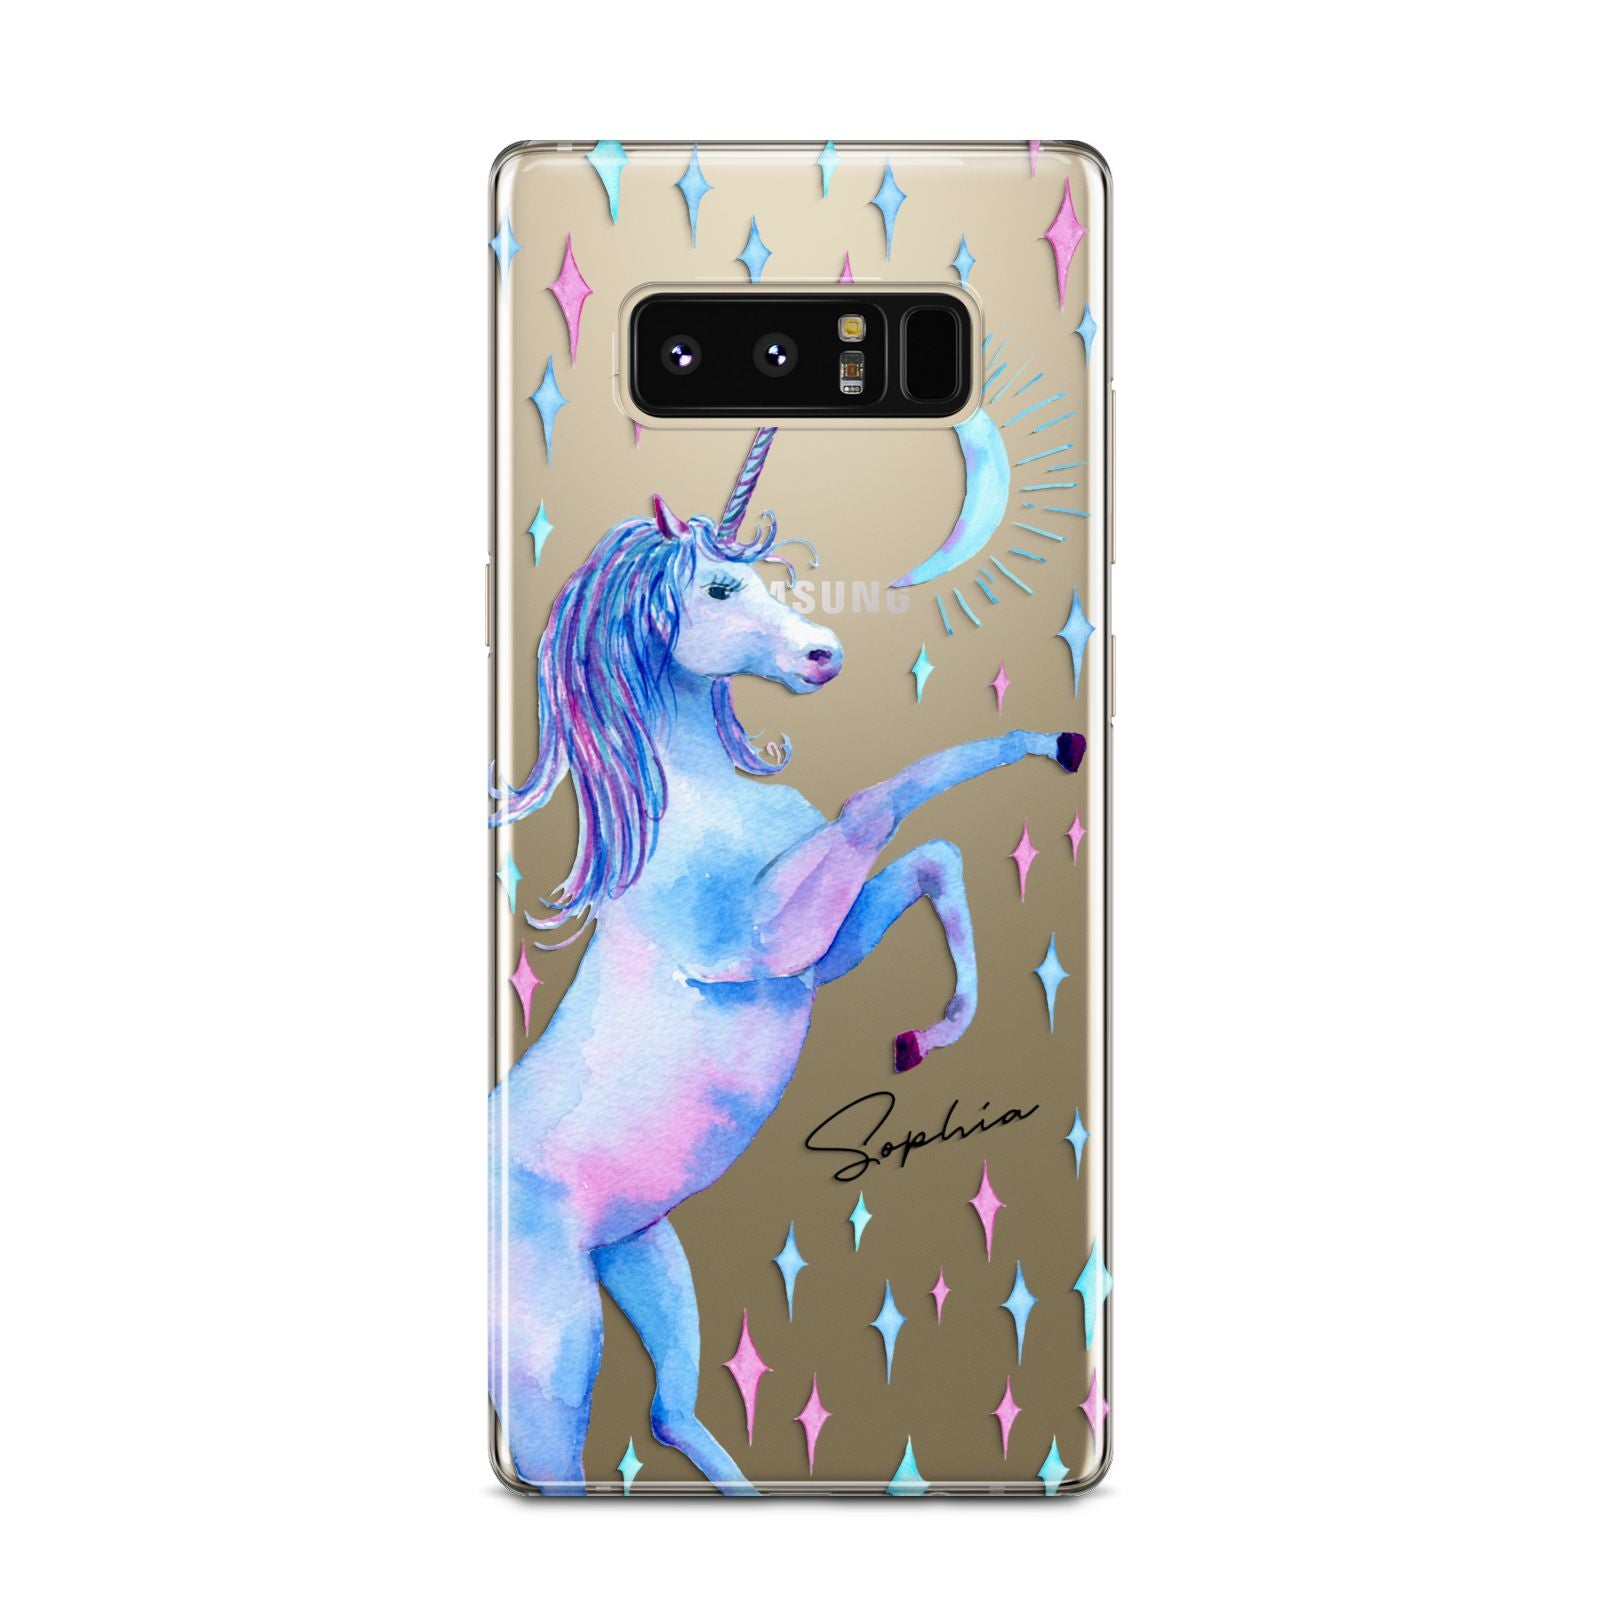 Personalised Unicorn Name Samsung Galaxy Note 8 Case